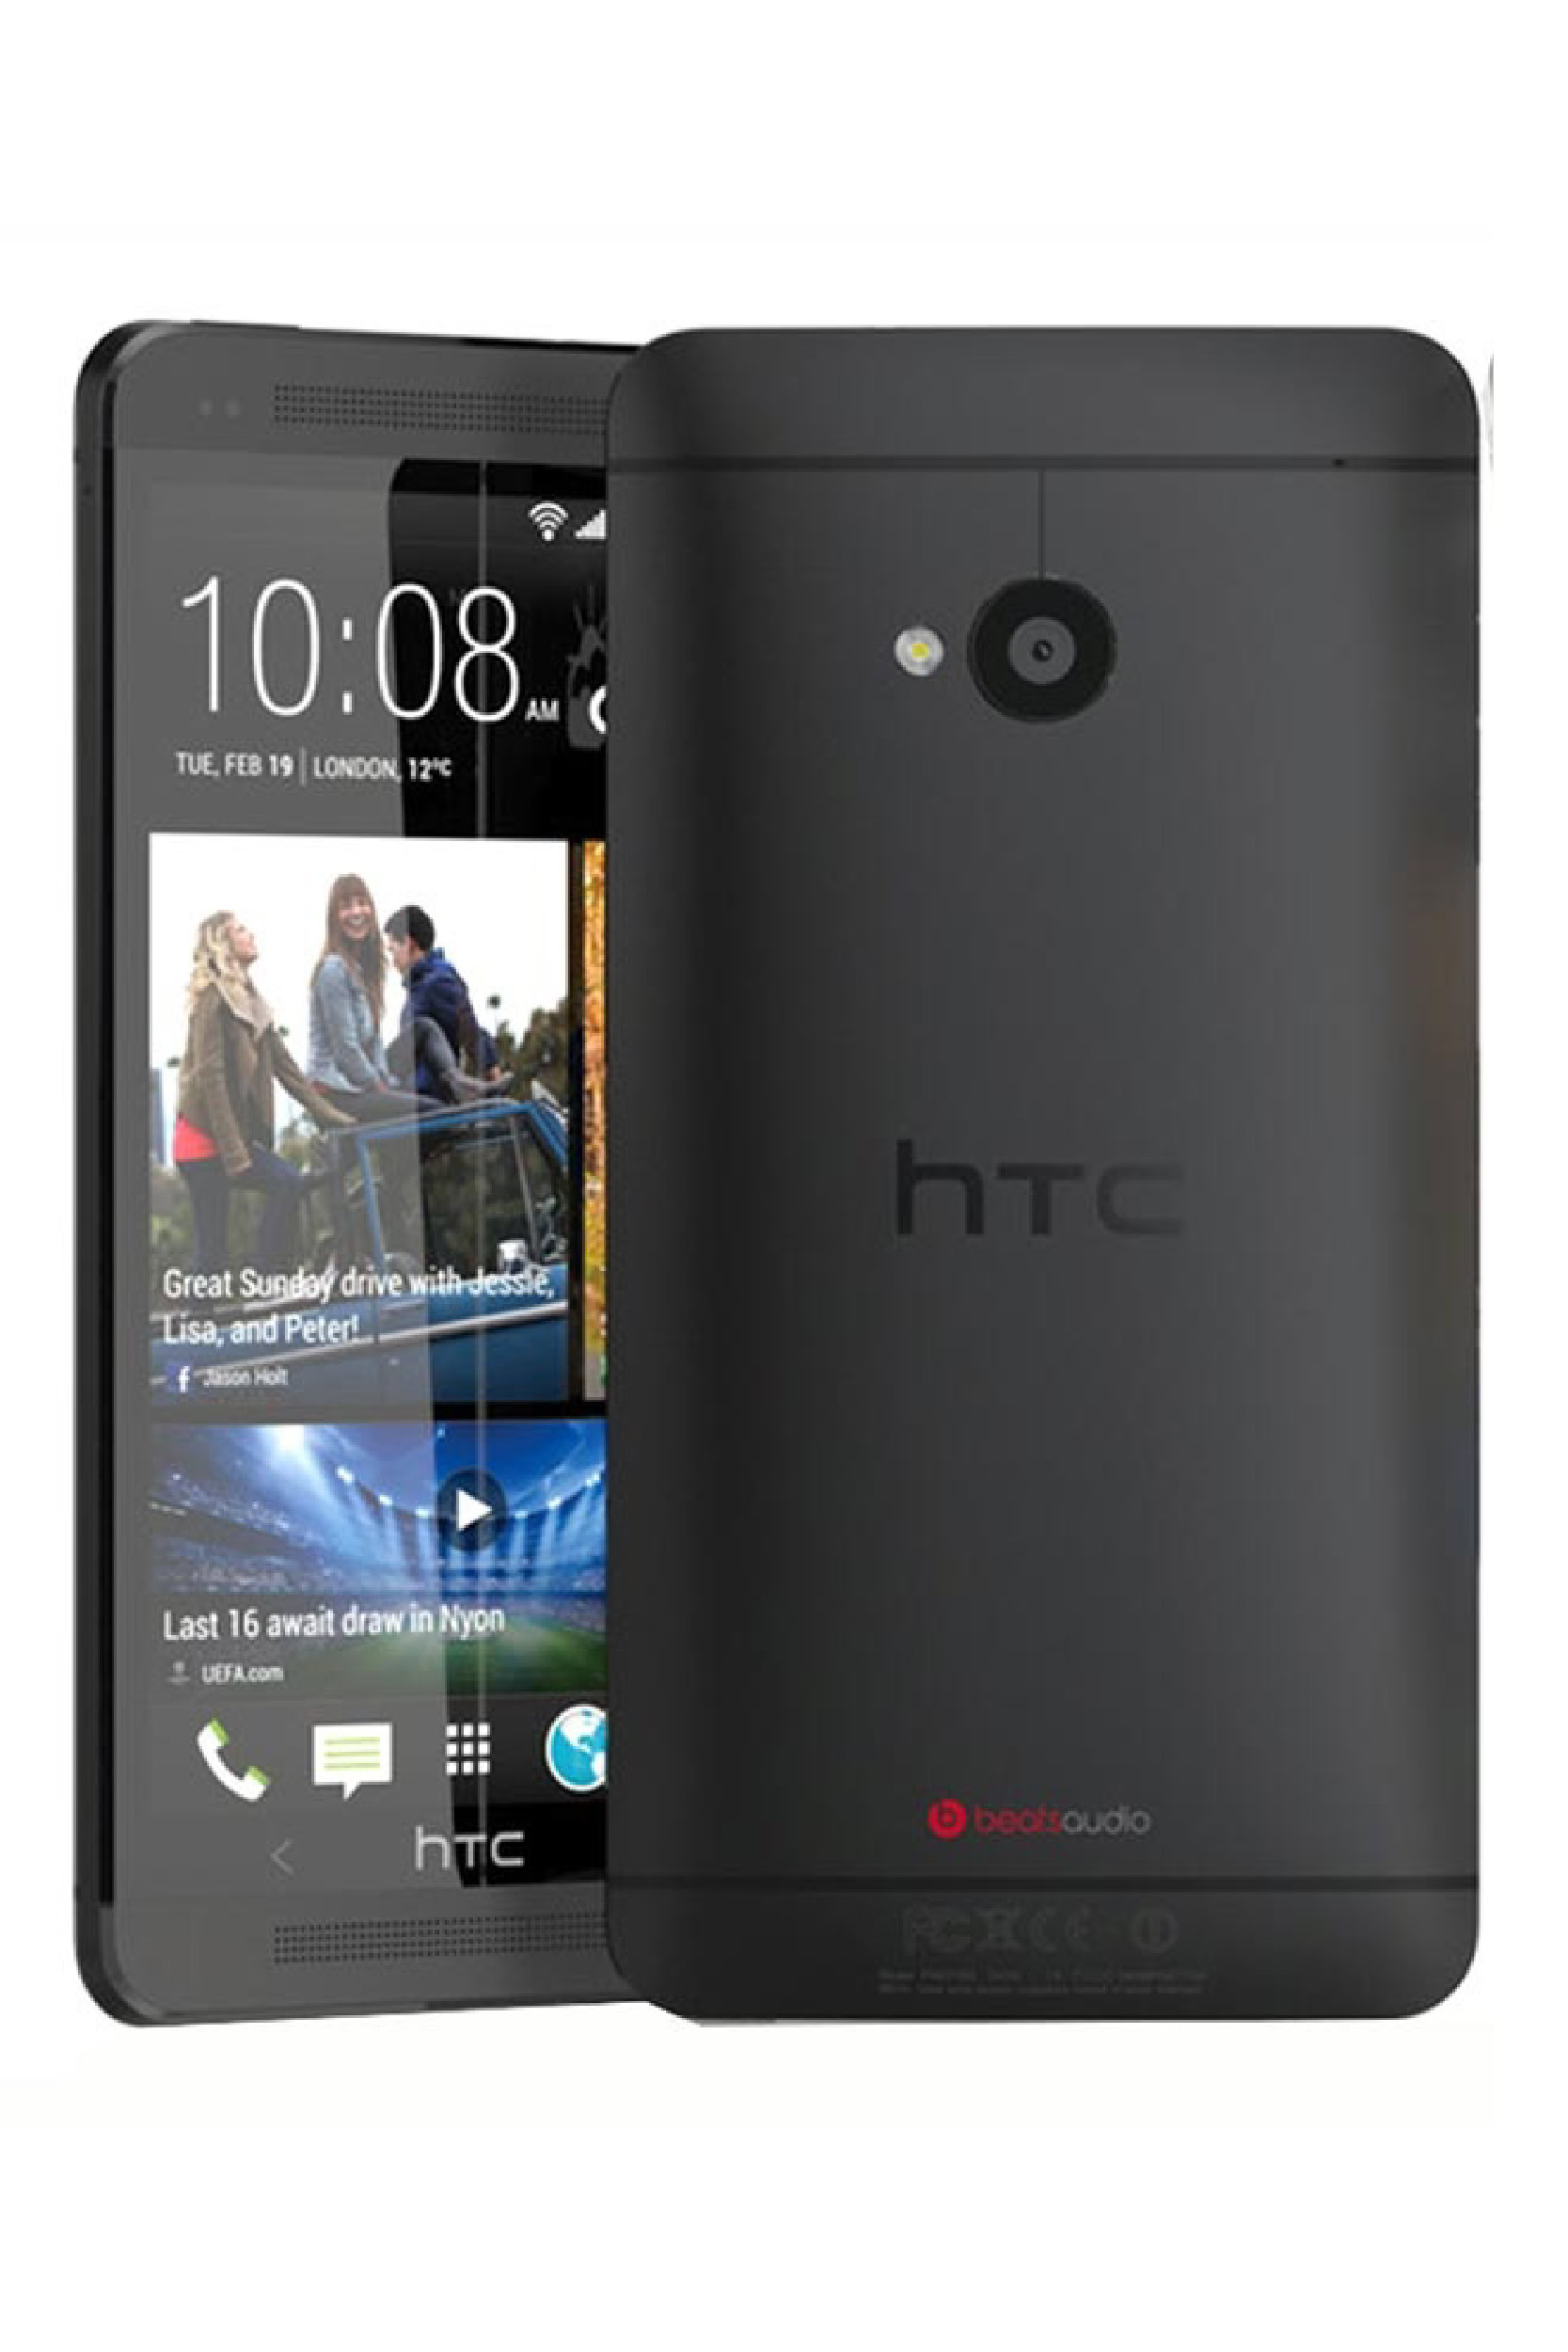 HTC M7 Price in Pakistan & Specs: Daily Updated | ProPakistani